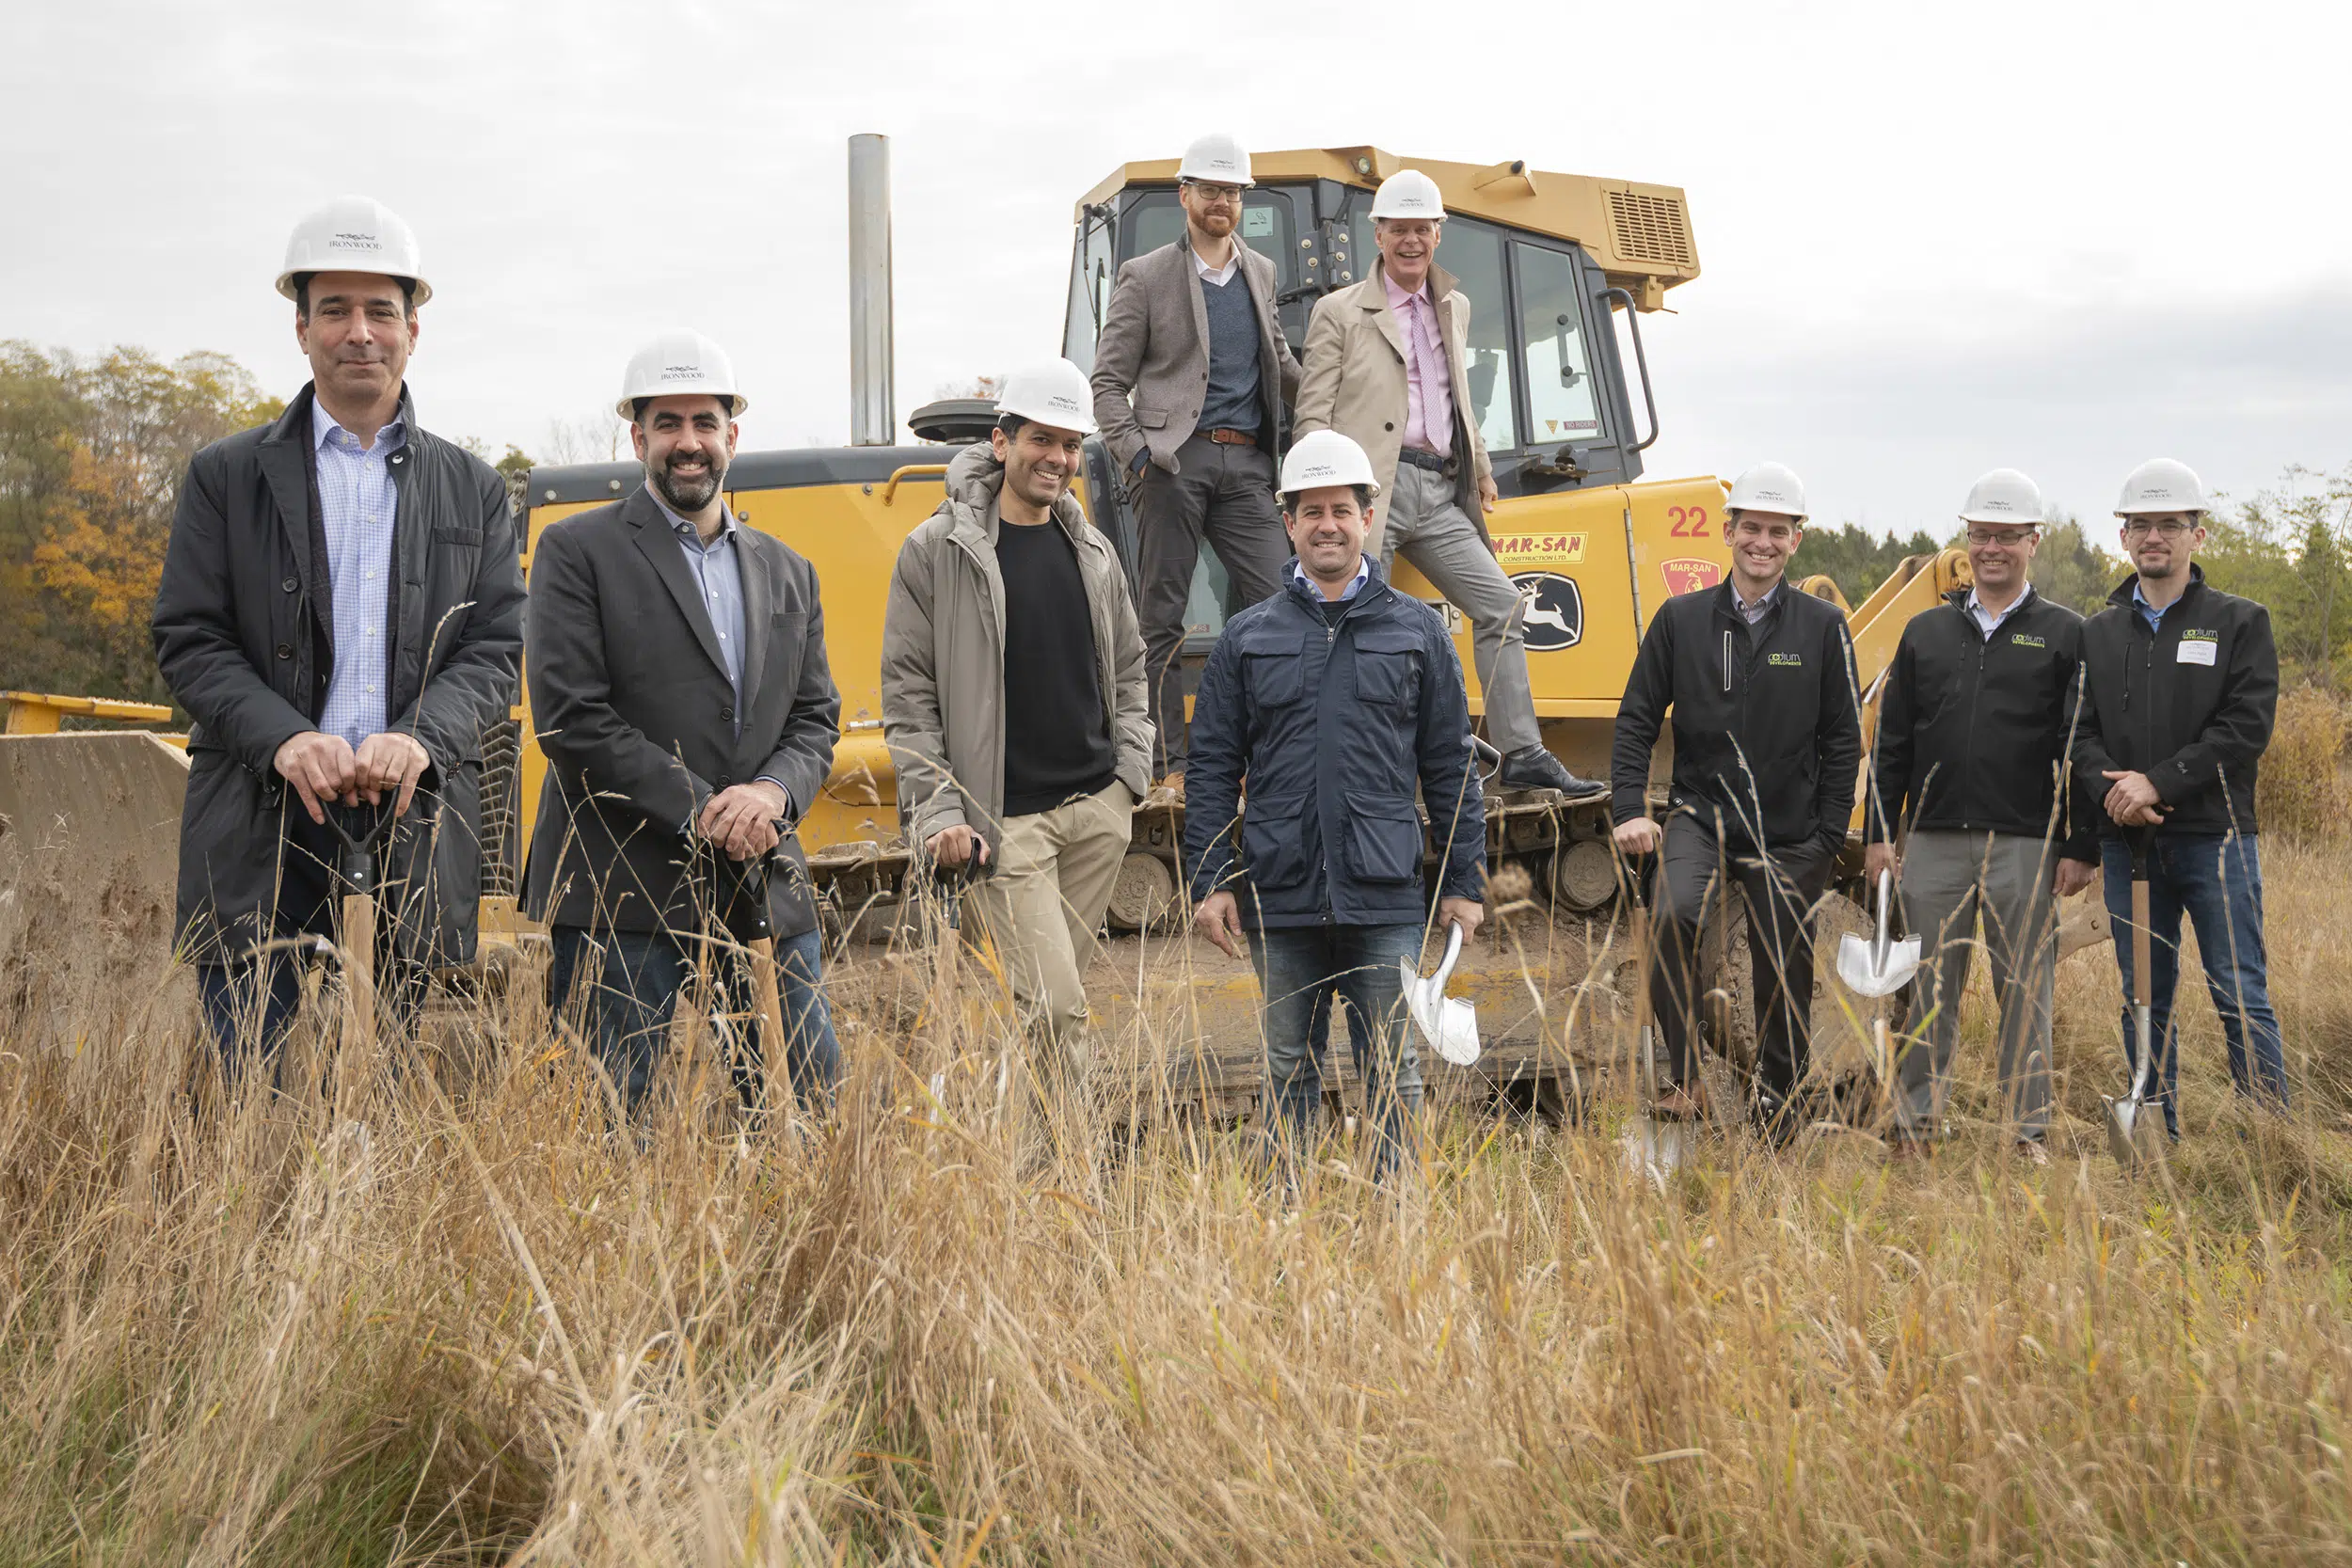 A team of developers pose for a group photo on a bulldozer. They are seen standing in long grass holding shovels and wearing hard hats.